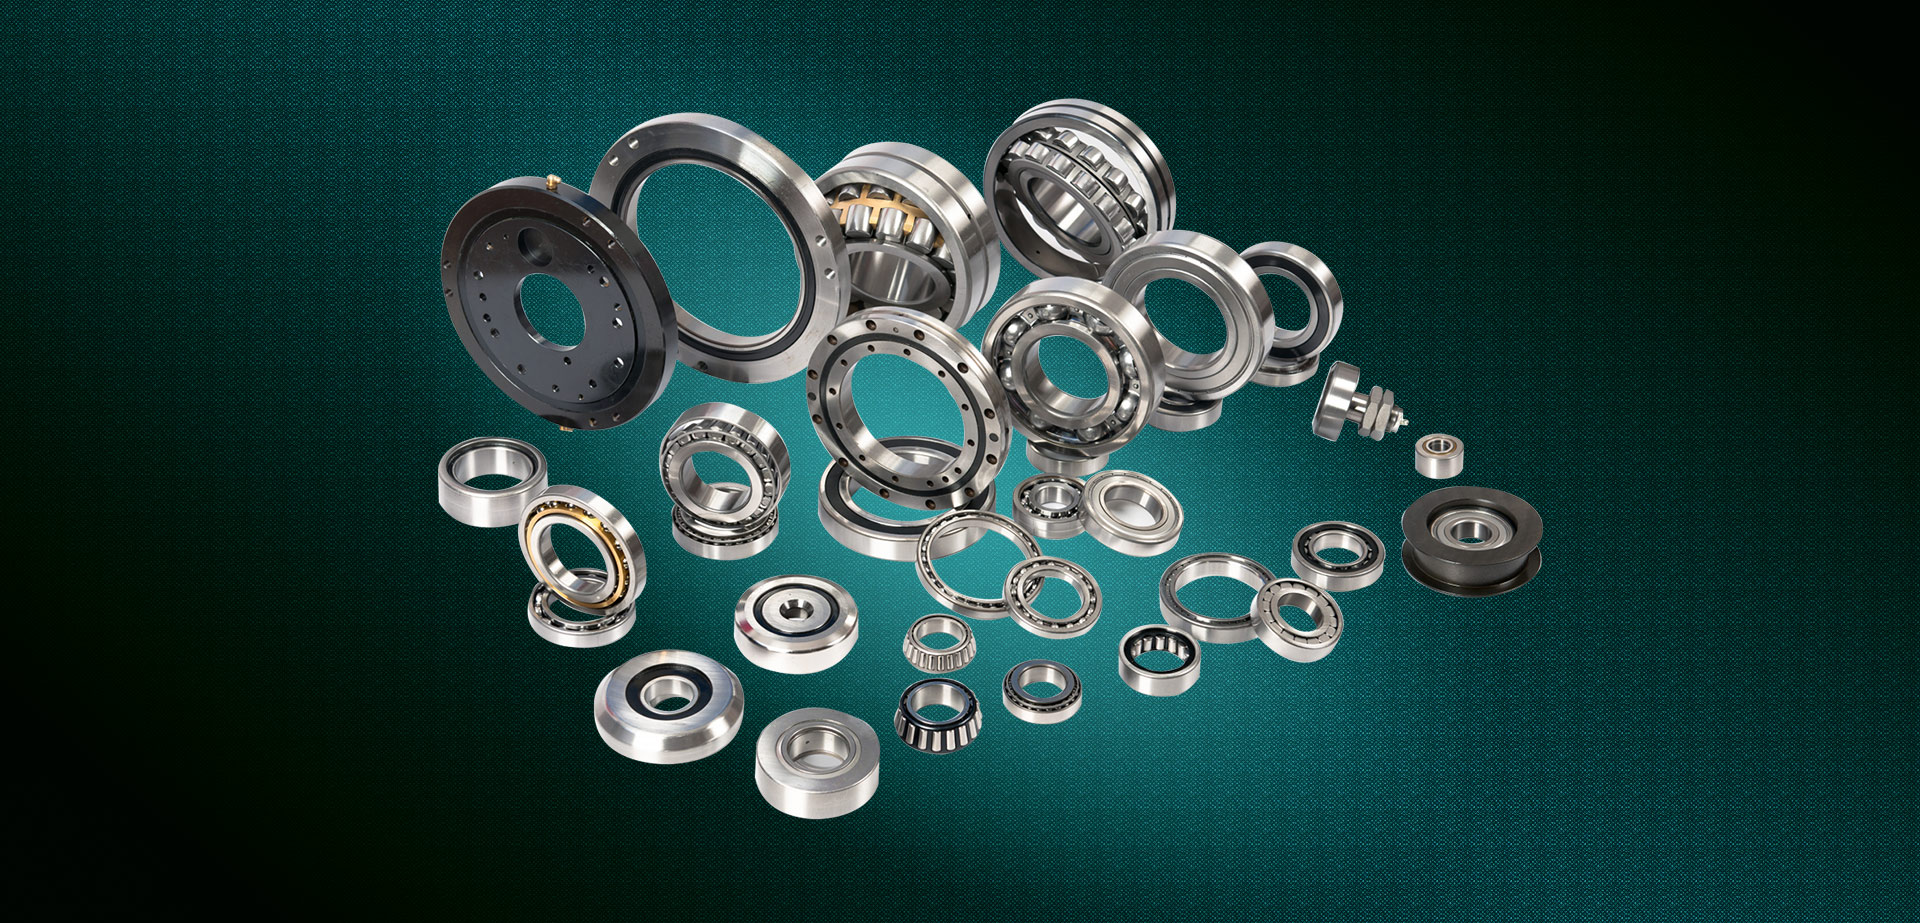 CMI focusing on high quality bearing solutions for global industry